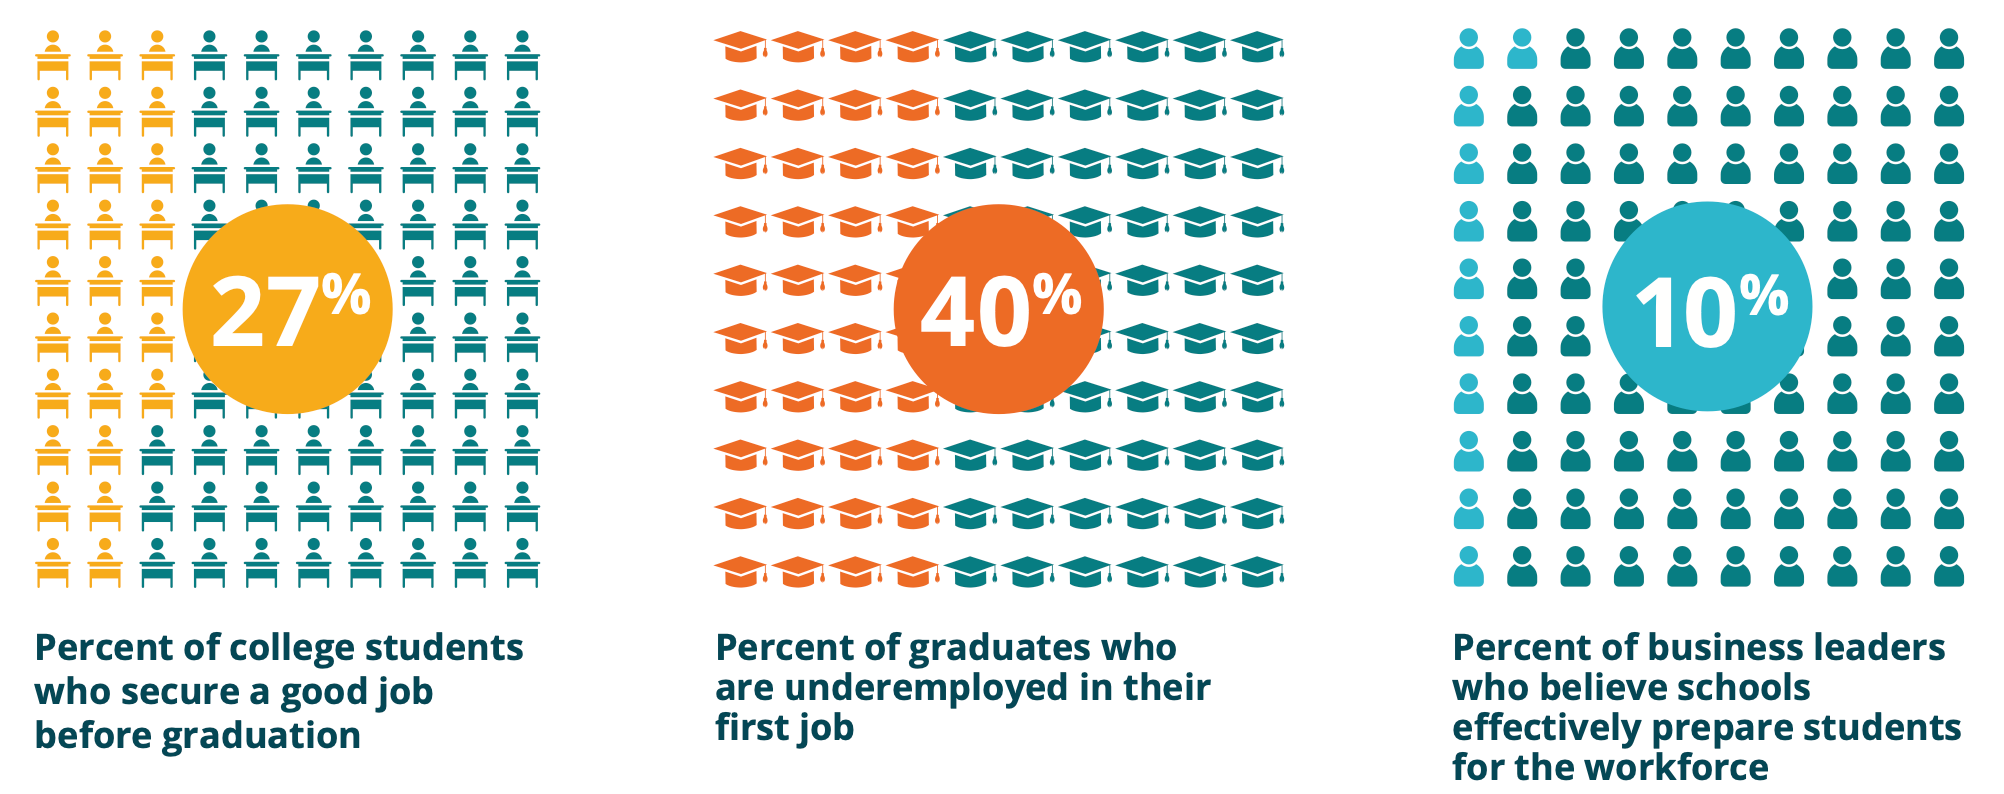 27% of college students secure a job before graduation, 40% of graduate students are underemployed in their first job, and 10% of business leaders believe that schools effectively prepare students for the workforce 